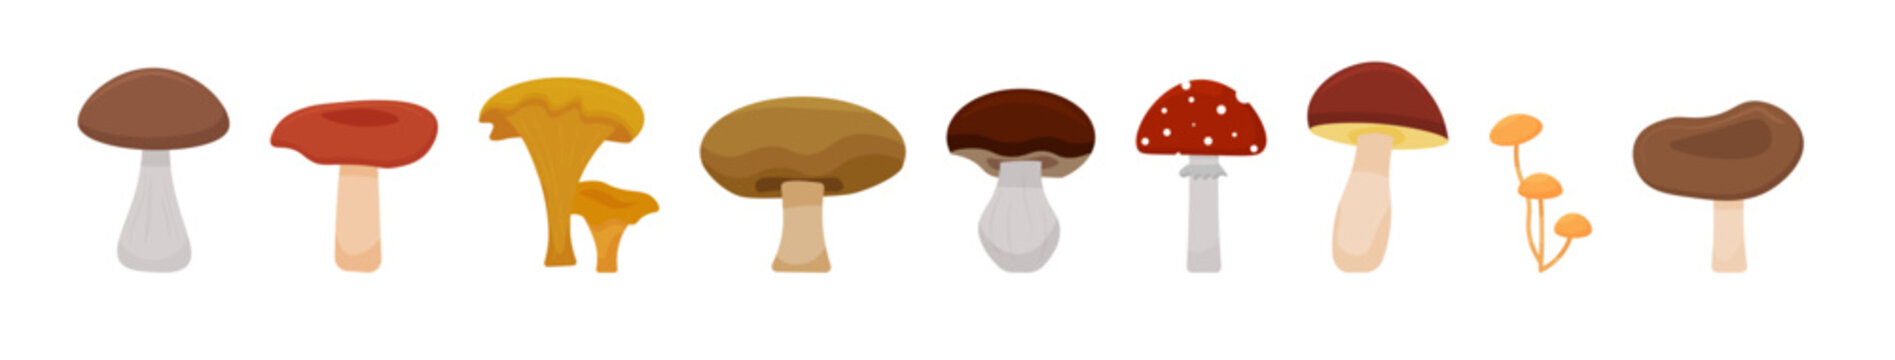 Vector cartoon mushrooms. Poisonous and edible mushrooms. Set of wild mushrooms. Vector illustration.